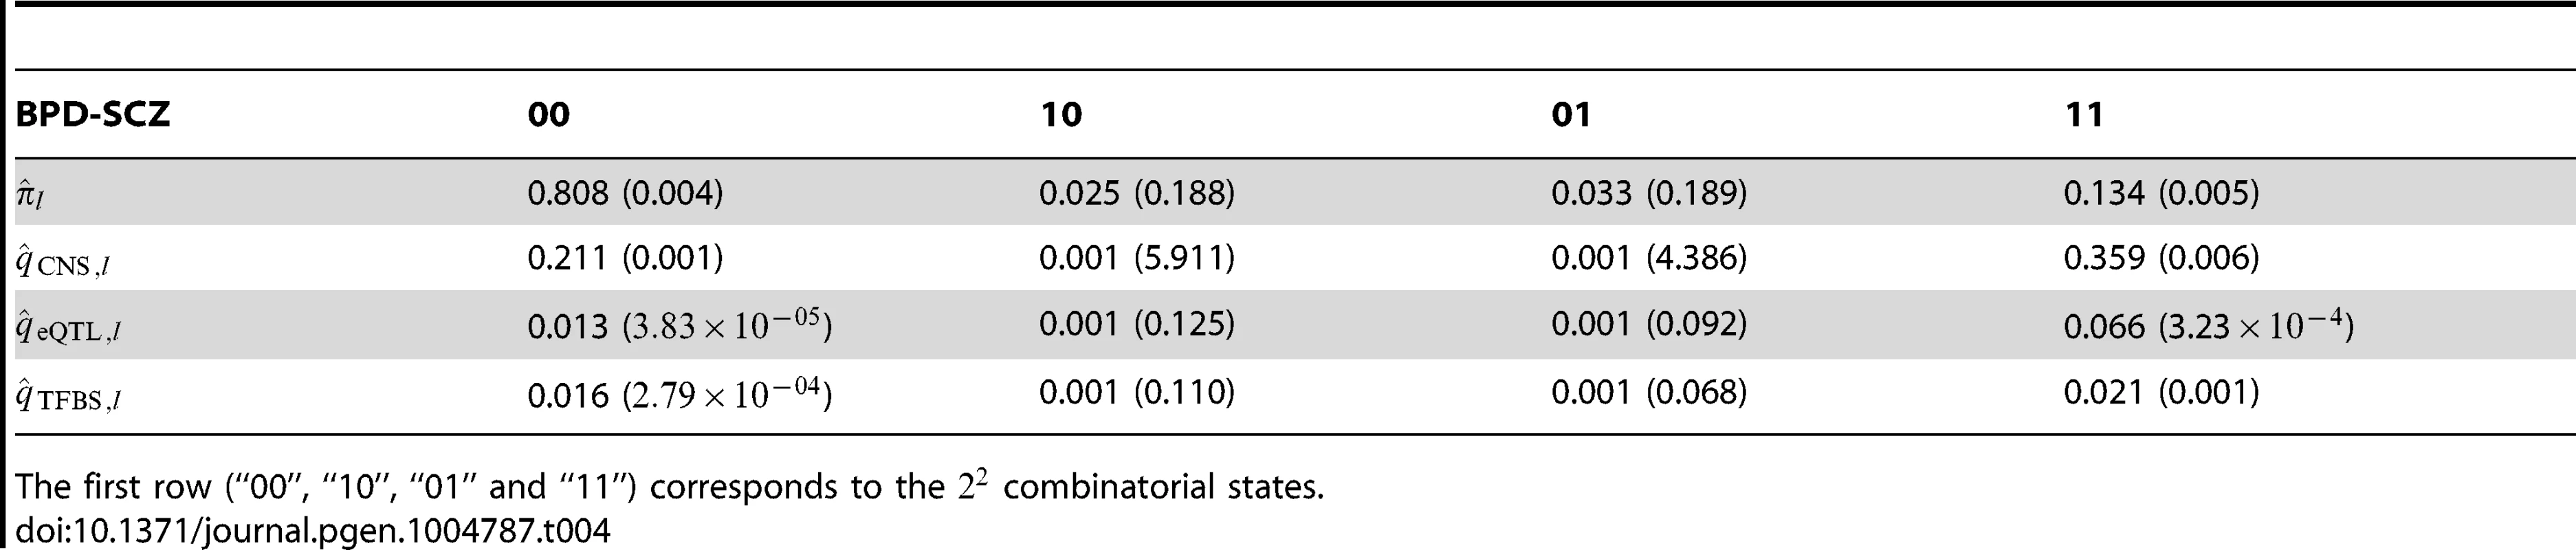 The estimated parameters and their standard errors for the joint analysis of BPD and SCZ, together with multiple annotation data: The CNS gene set, eQTL and TFBS.